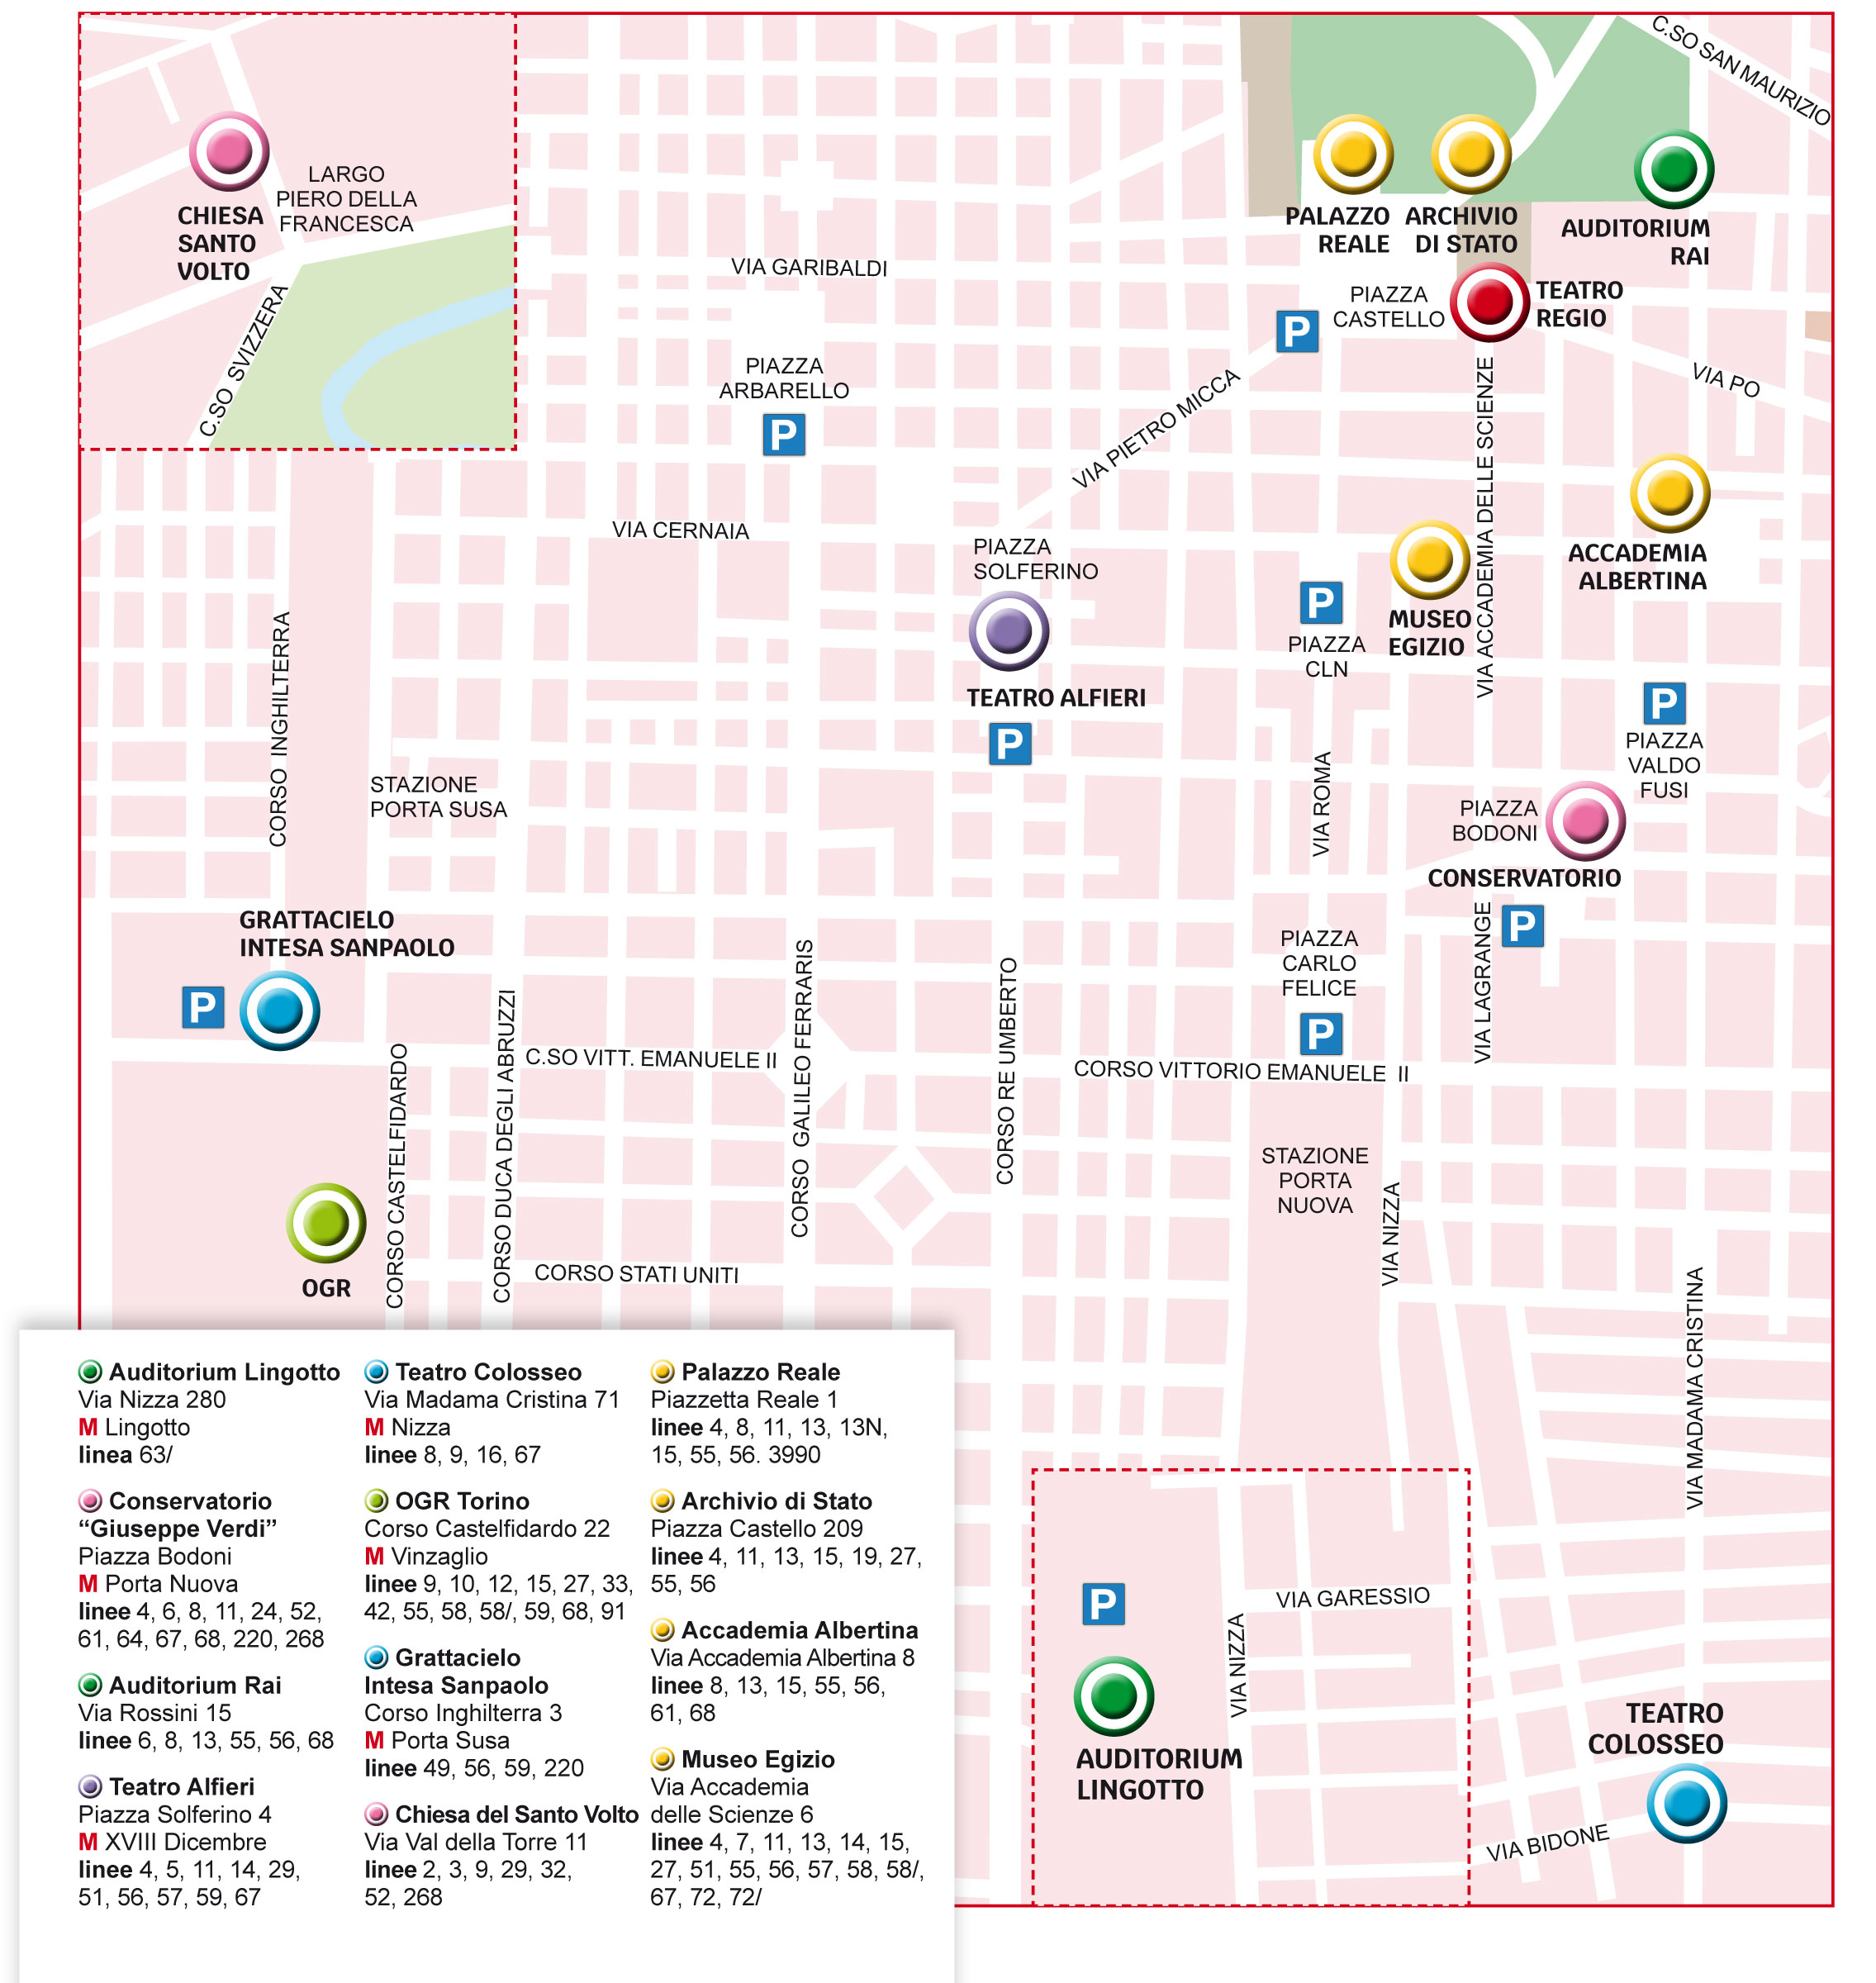 The map of the sites of shows and exhibitions